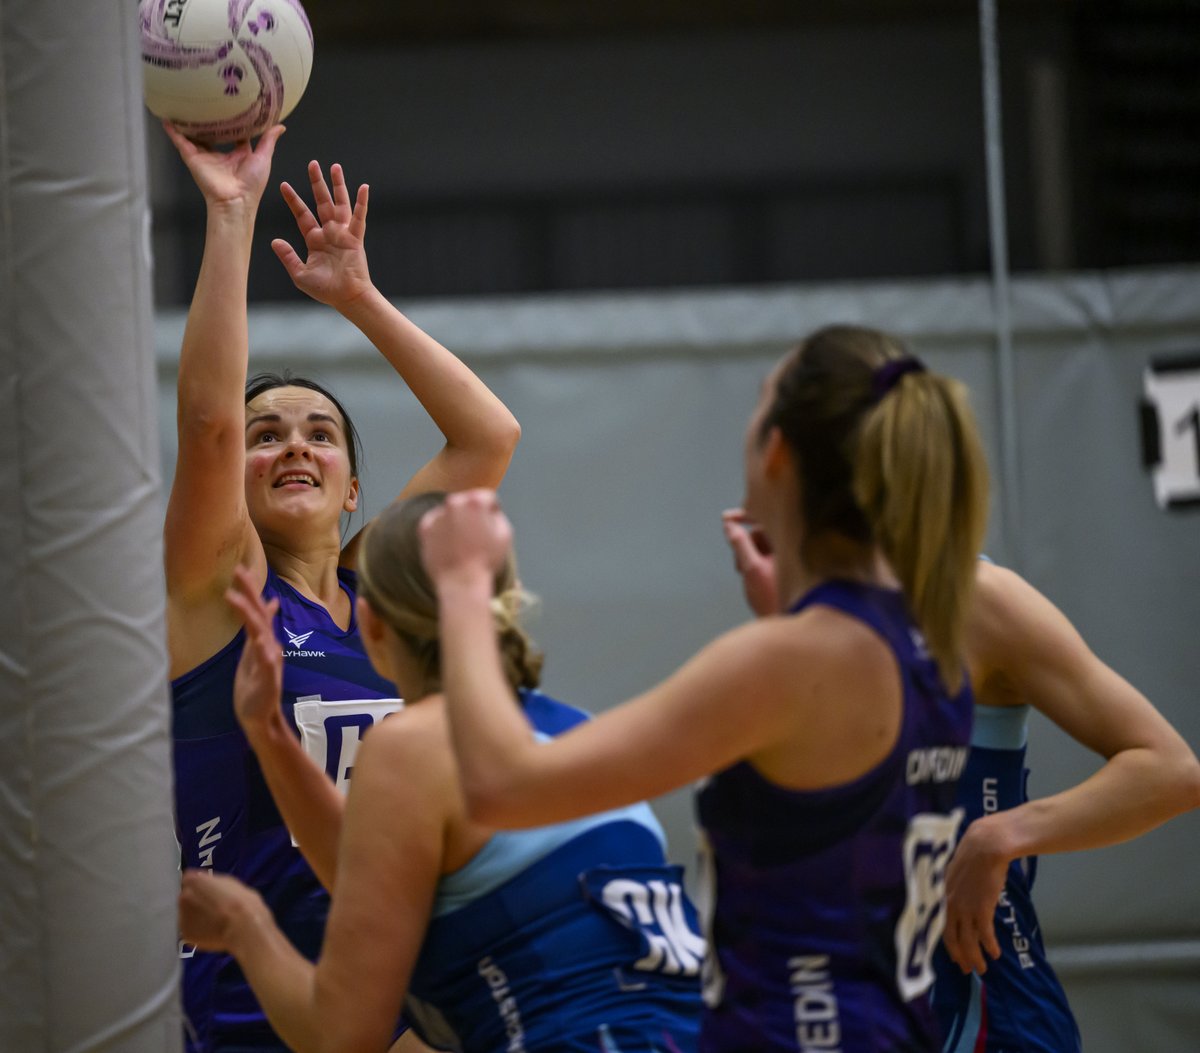 We are rounding up the thrilling highlights from Netball Scotland's National League season opener!! Tickets for Round 2 are coming soon! Tag your club get behind the biggest Netball league in 🏴󠁧󠁢󠁳󠁣󠁴󠁿 netballscotland.com/national-leagu… #PowerofScotland #Netball #Scotland